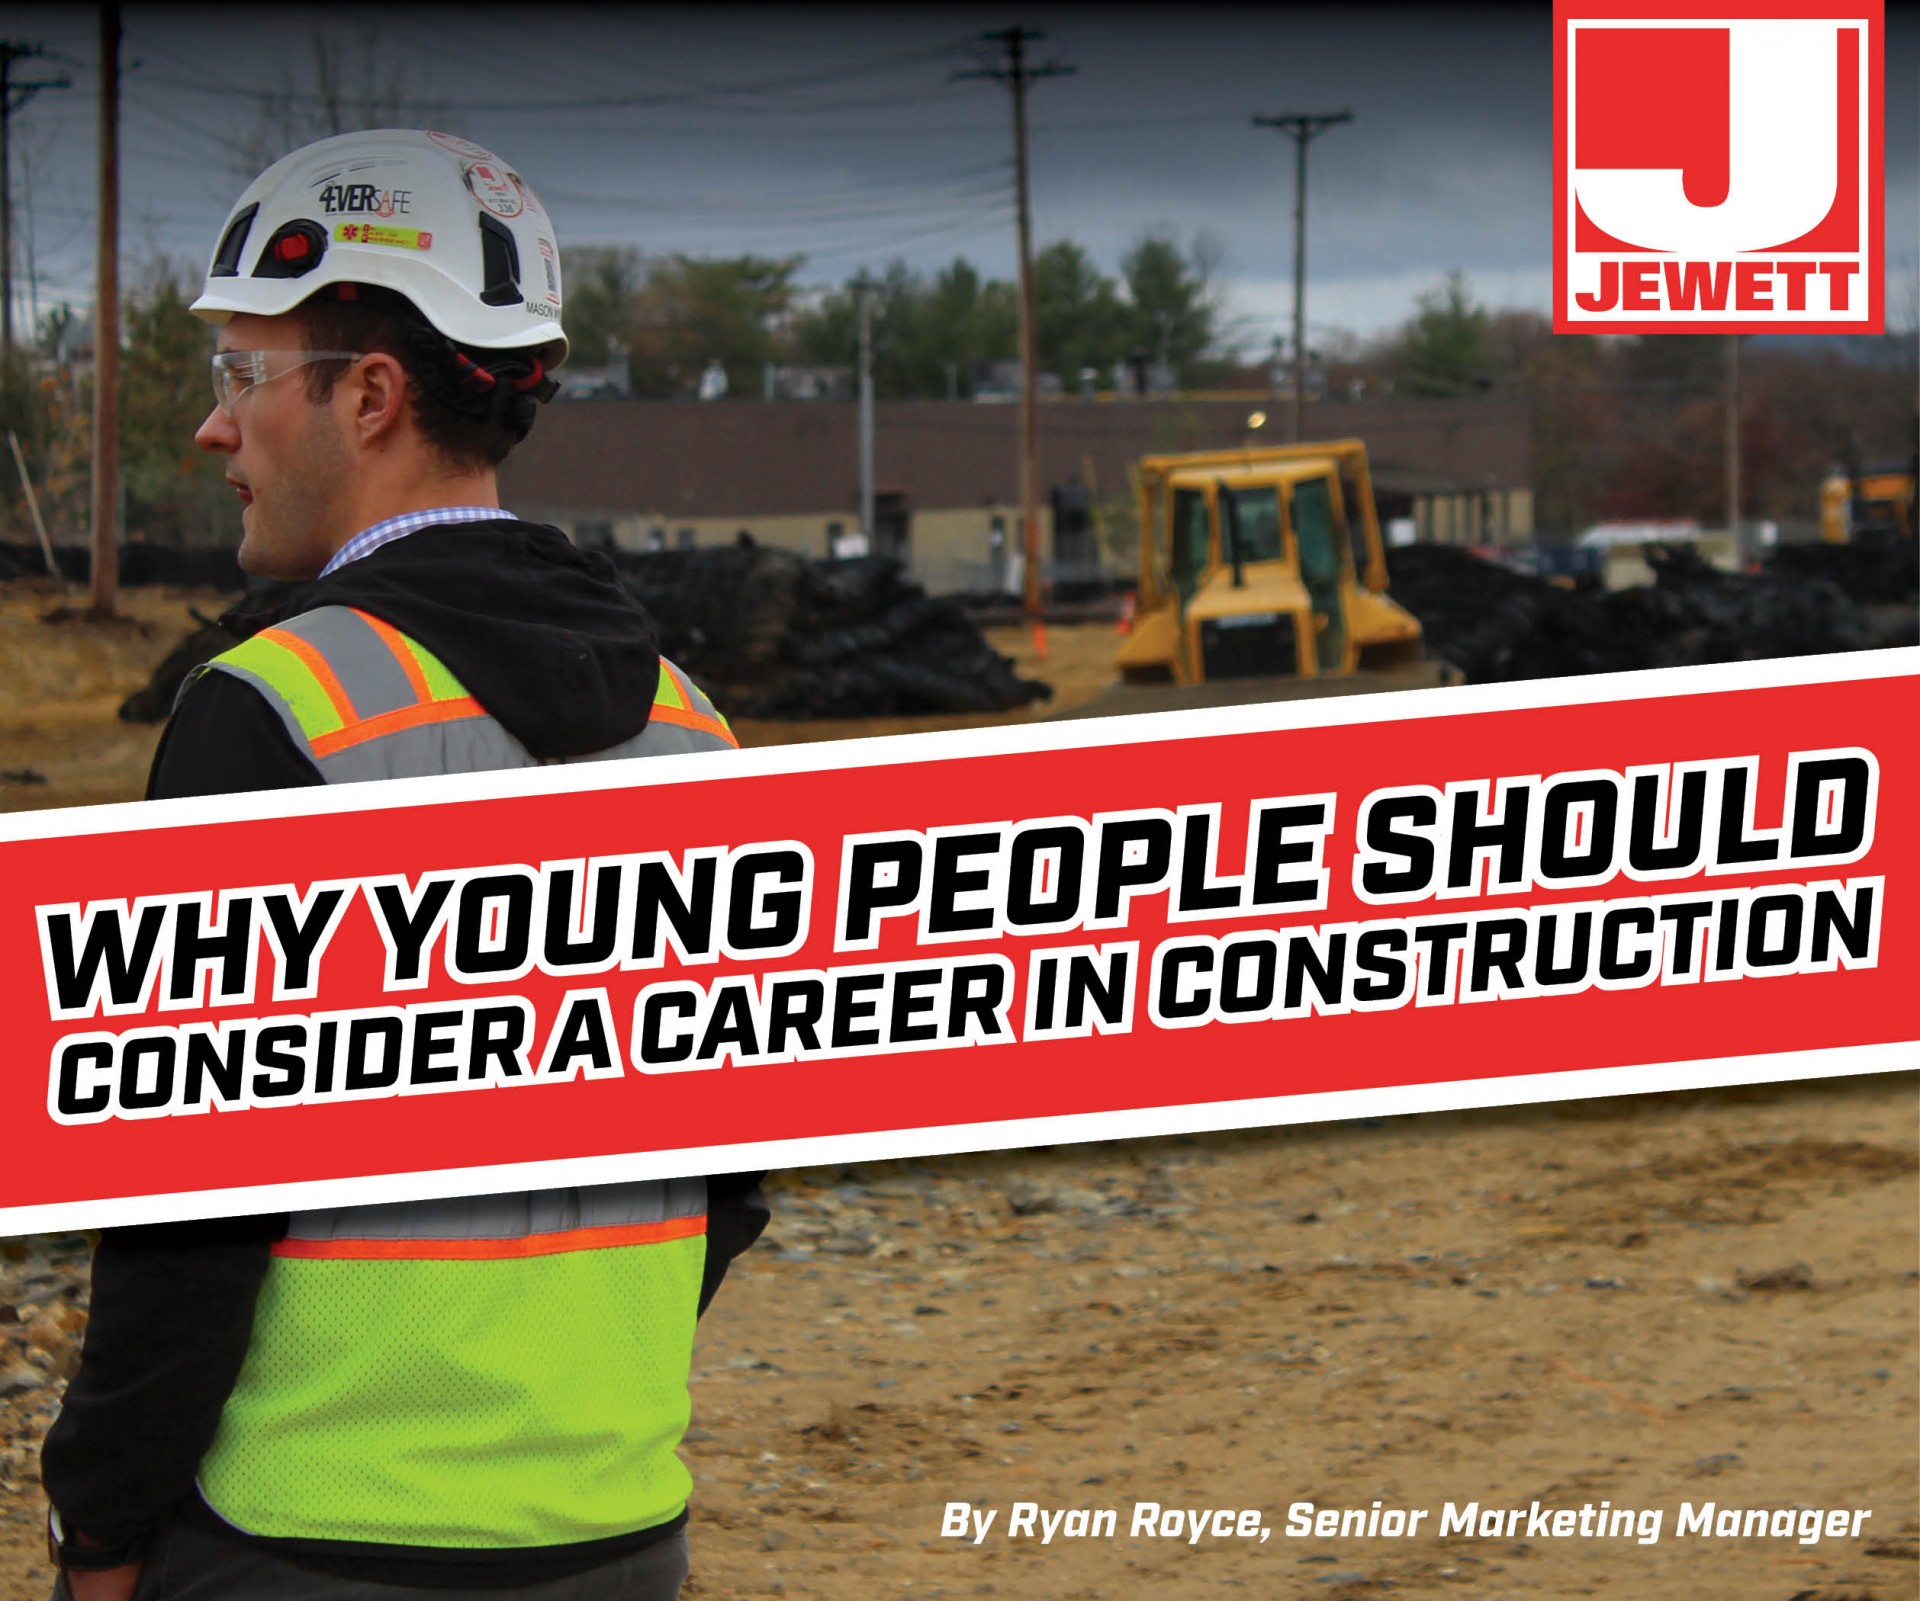 Why Should Young People Consider a Career in Construction?